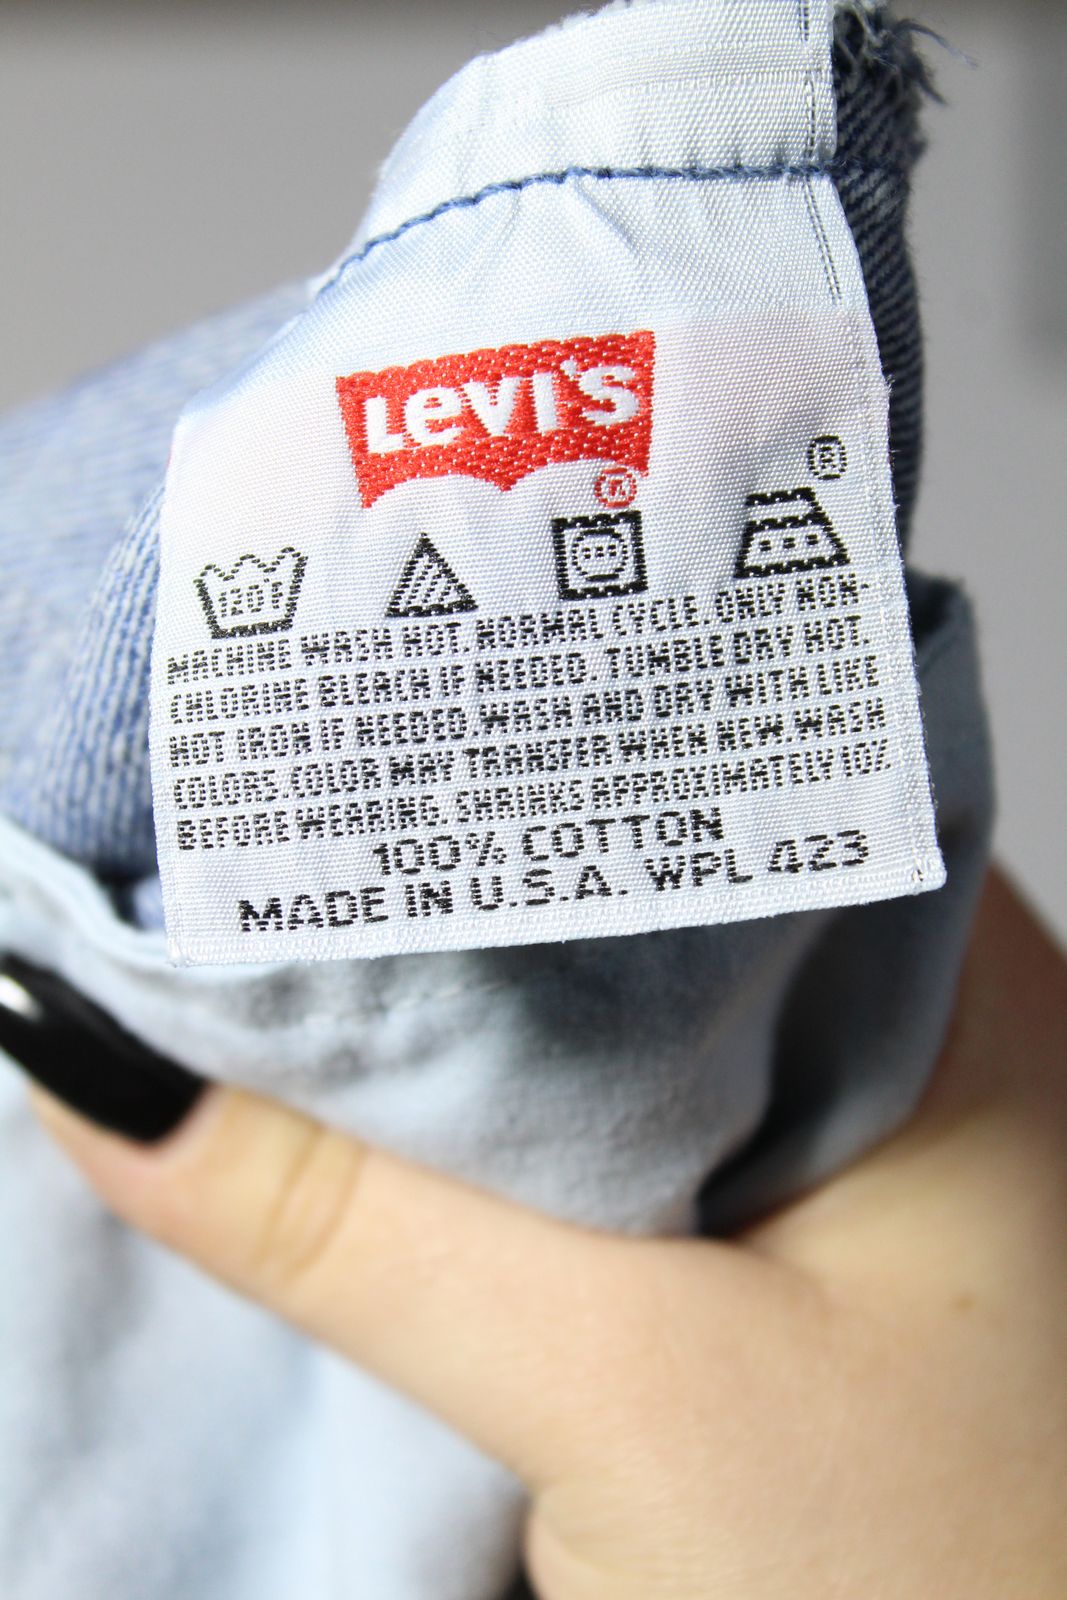 Levi's 501 Made In USA W36 L32 Vintage